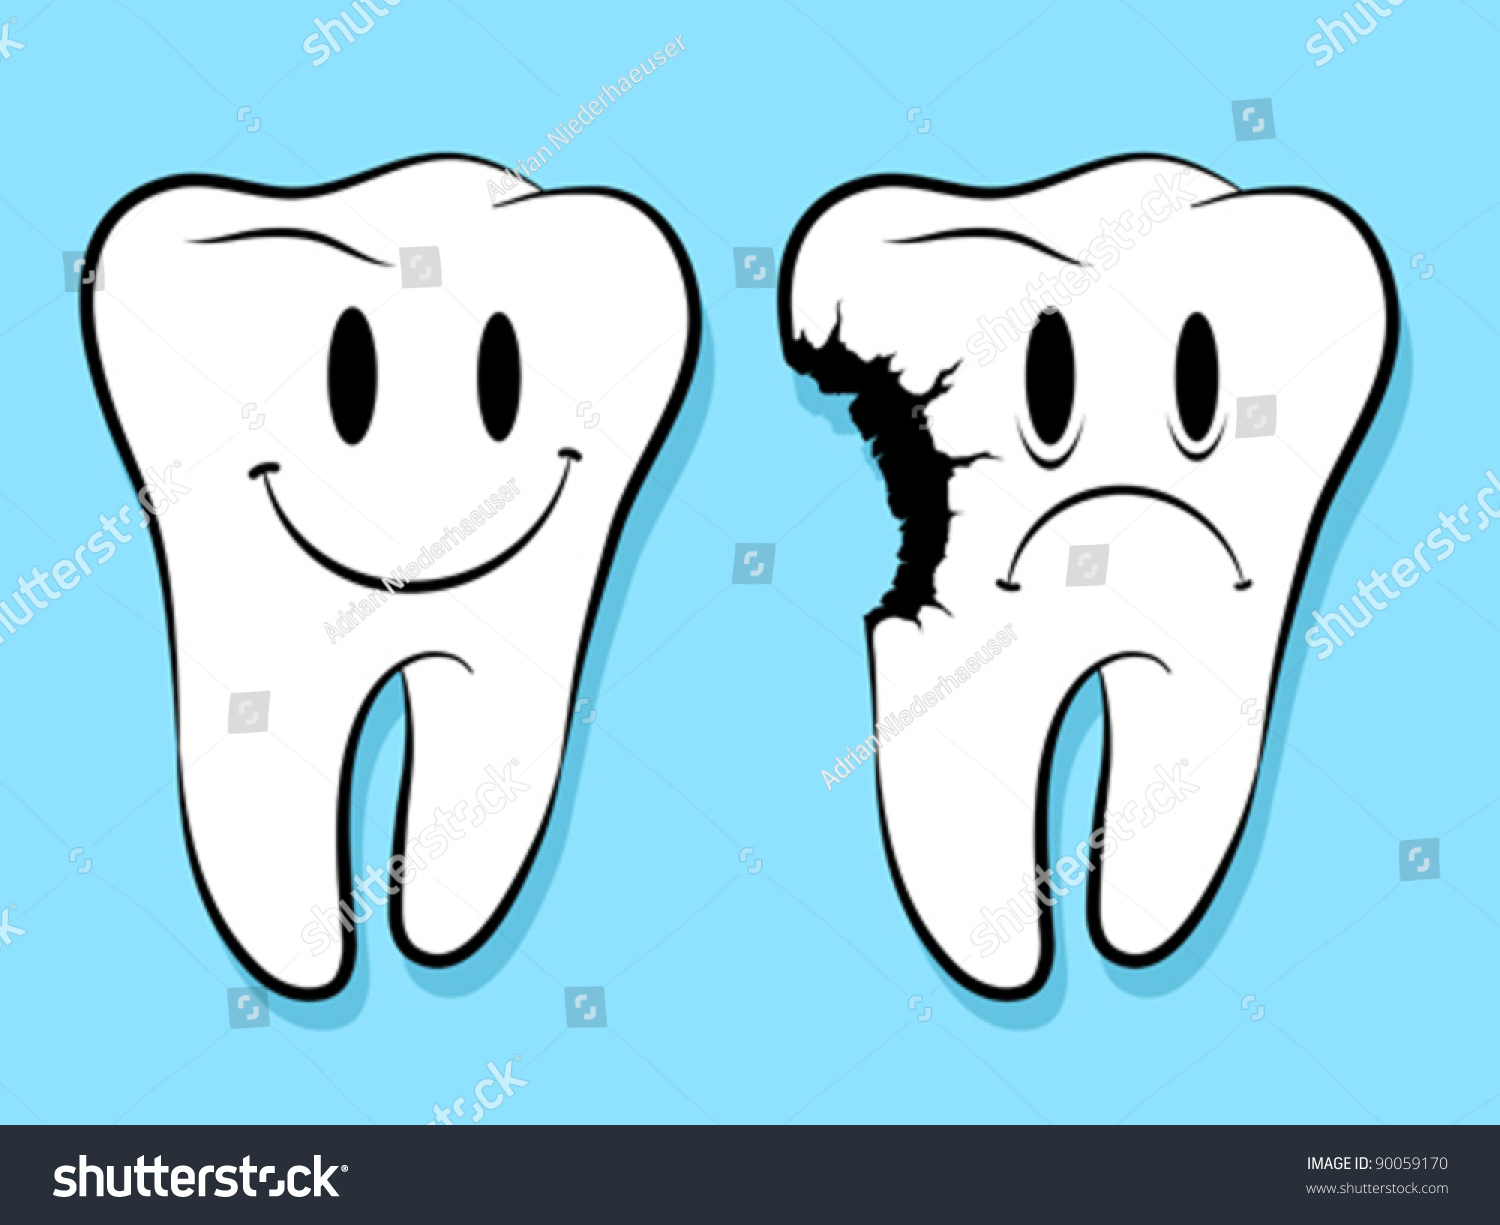 Fun Faces On Healthy Decayed Teeth Stock Vector 90059170 - Shutterstock